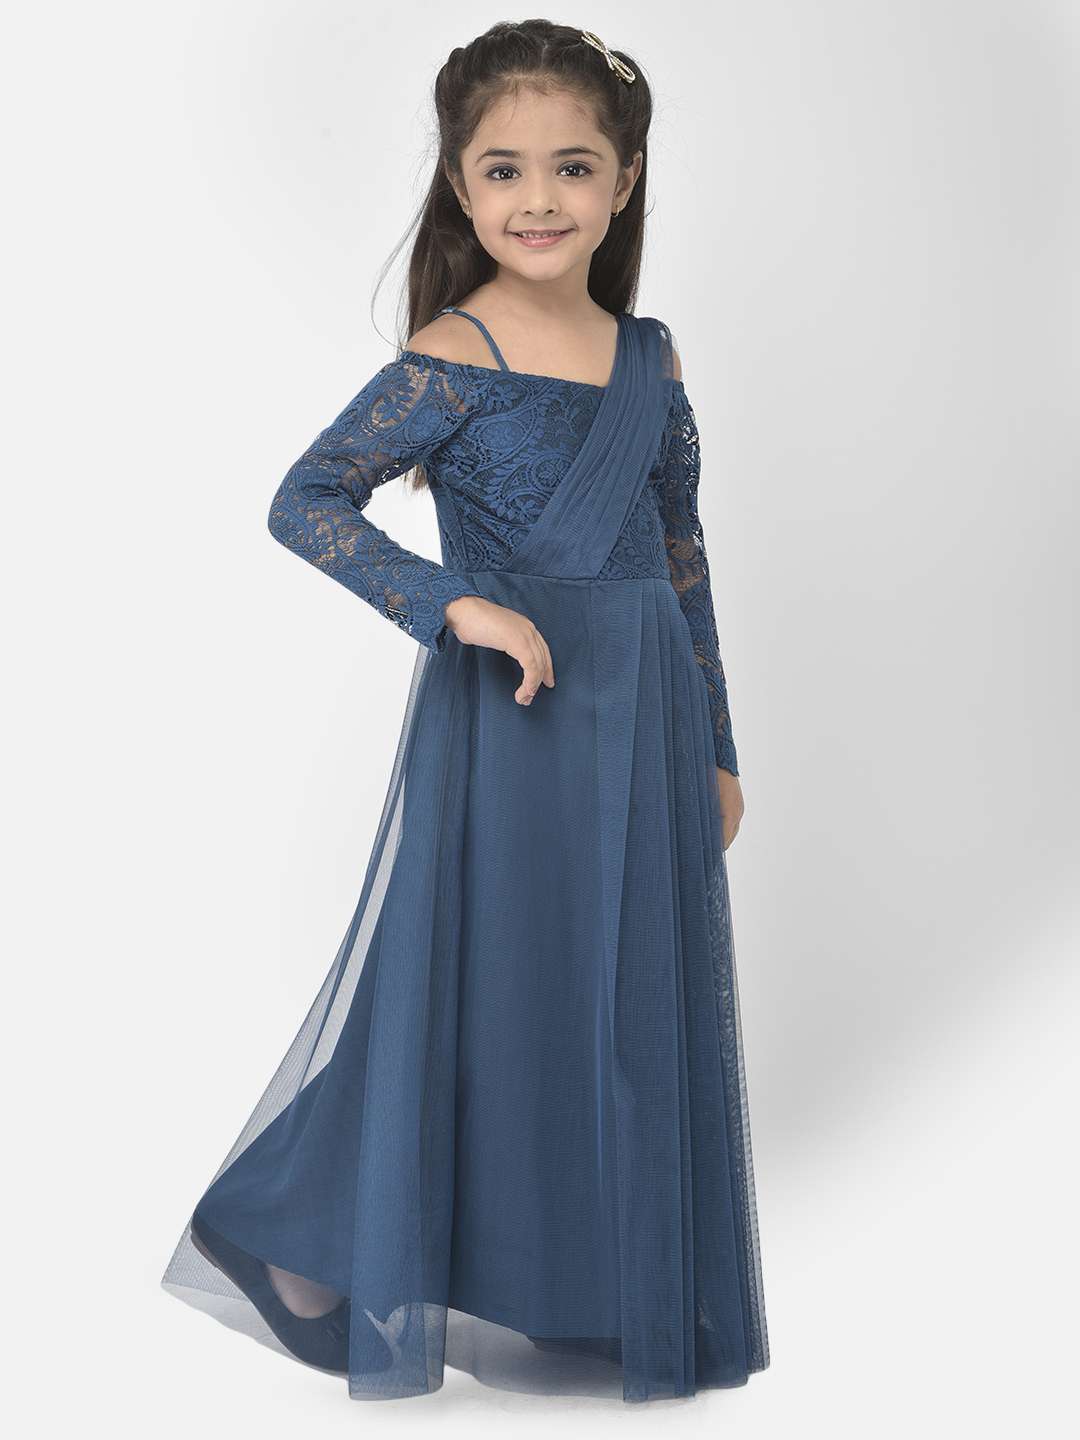 R Cube Kids Girl's Princess Look Ball Gown Dress (Blue, 2-3 Years) :  Amazon.in: Clothing & Accessories